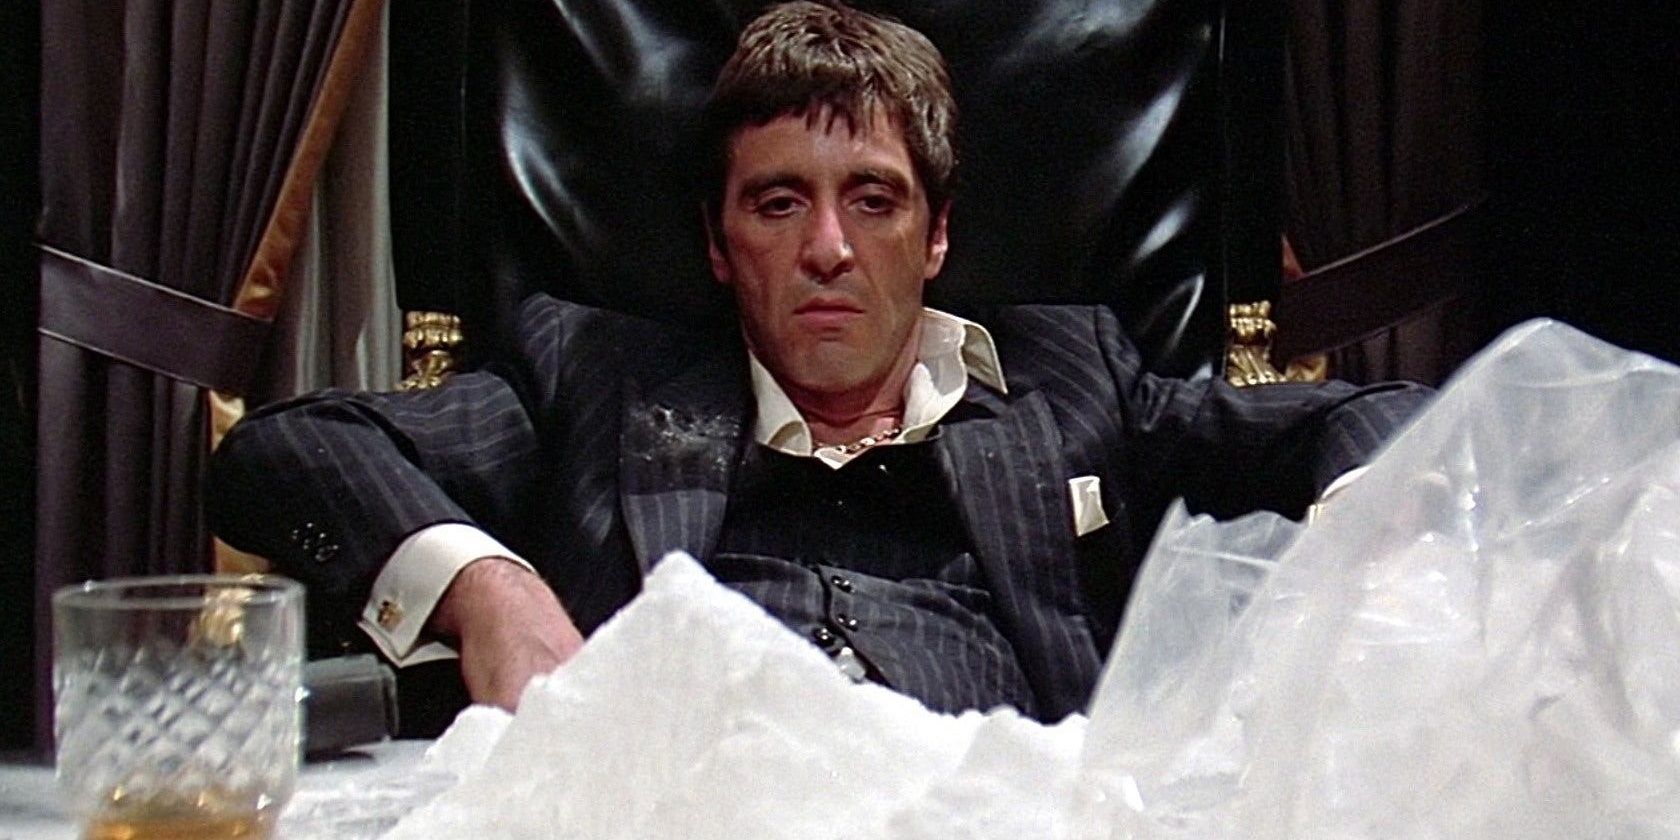 Tony Montana slouches in his seat as he looks at a mountain of cocaine on his desk in Scarface